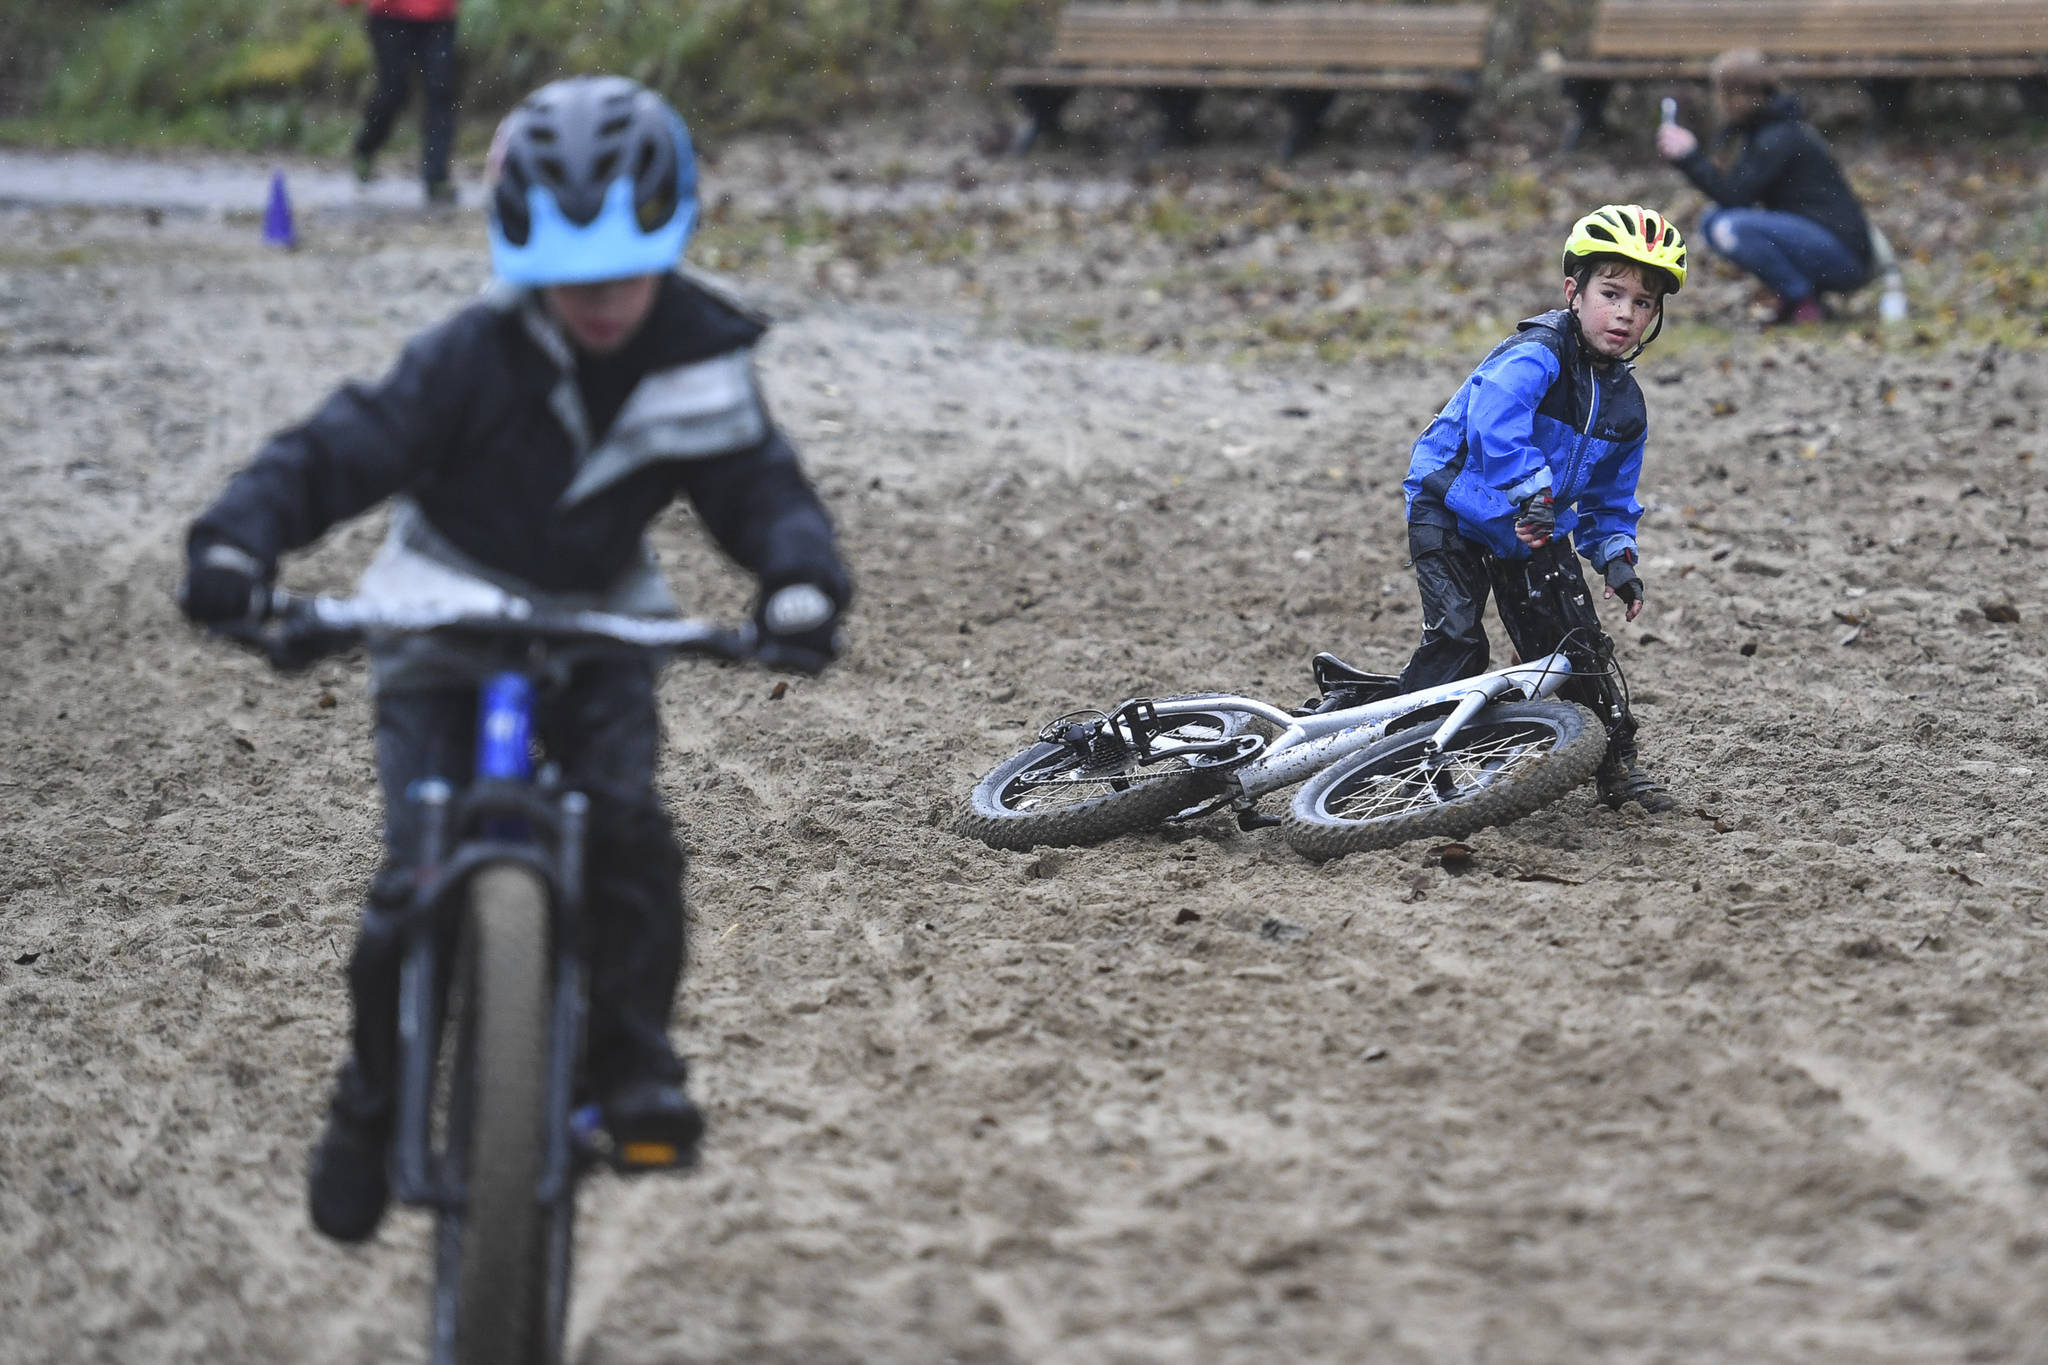 Pearson Fagel, 6, takes a spill at the finish of the Douglas Dirt Derby Youth Bike Race for 5 to 7-year-olds at Savikko Park and the Treadwell Historic Trail on Saturday, Oct. 5, 2019. The event was organized by the Juneau Freewheelers Bicycle Club. (Michael Penn | Juneau Empire)